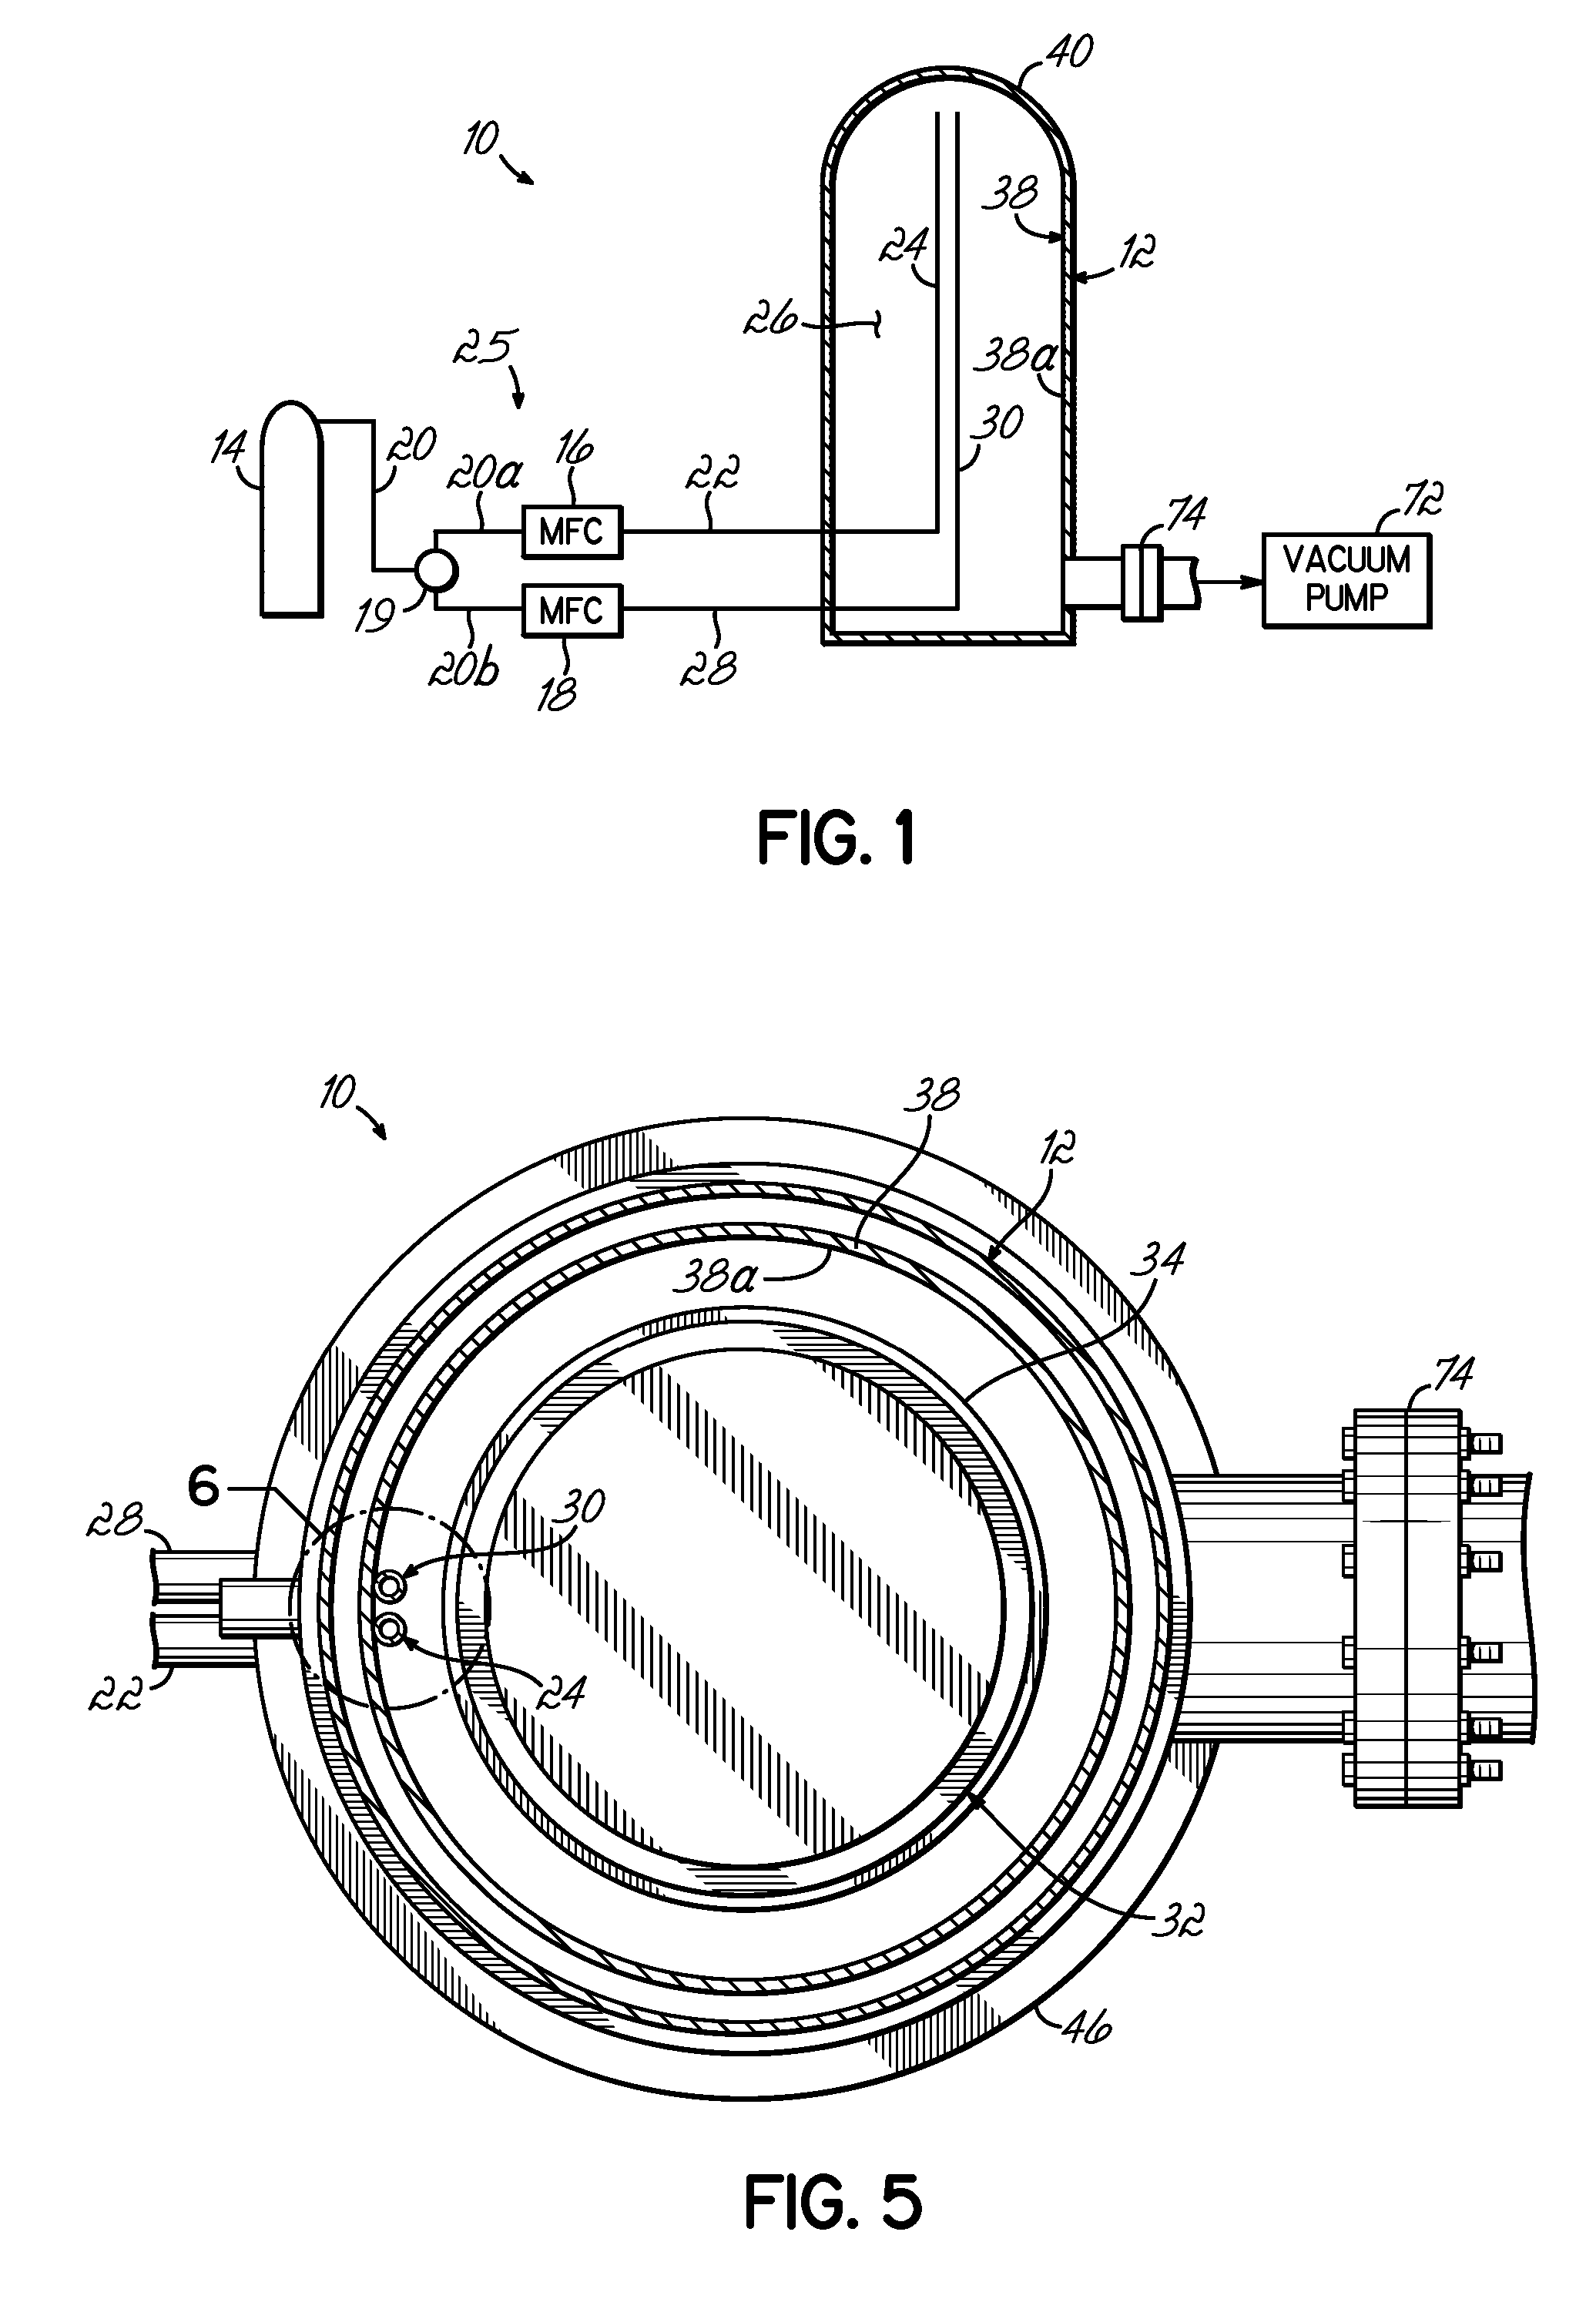 Thermal processing furnace, gas delivery system therefor, and methods for delivering a process gas thereto